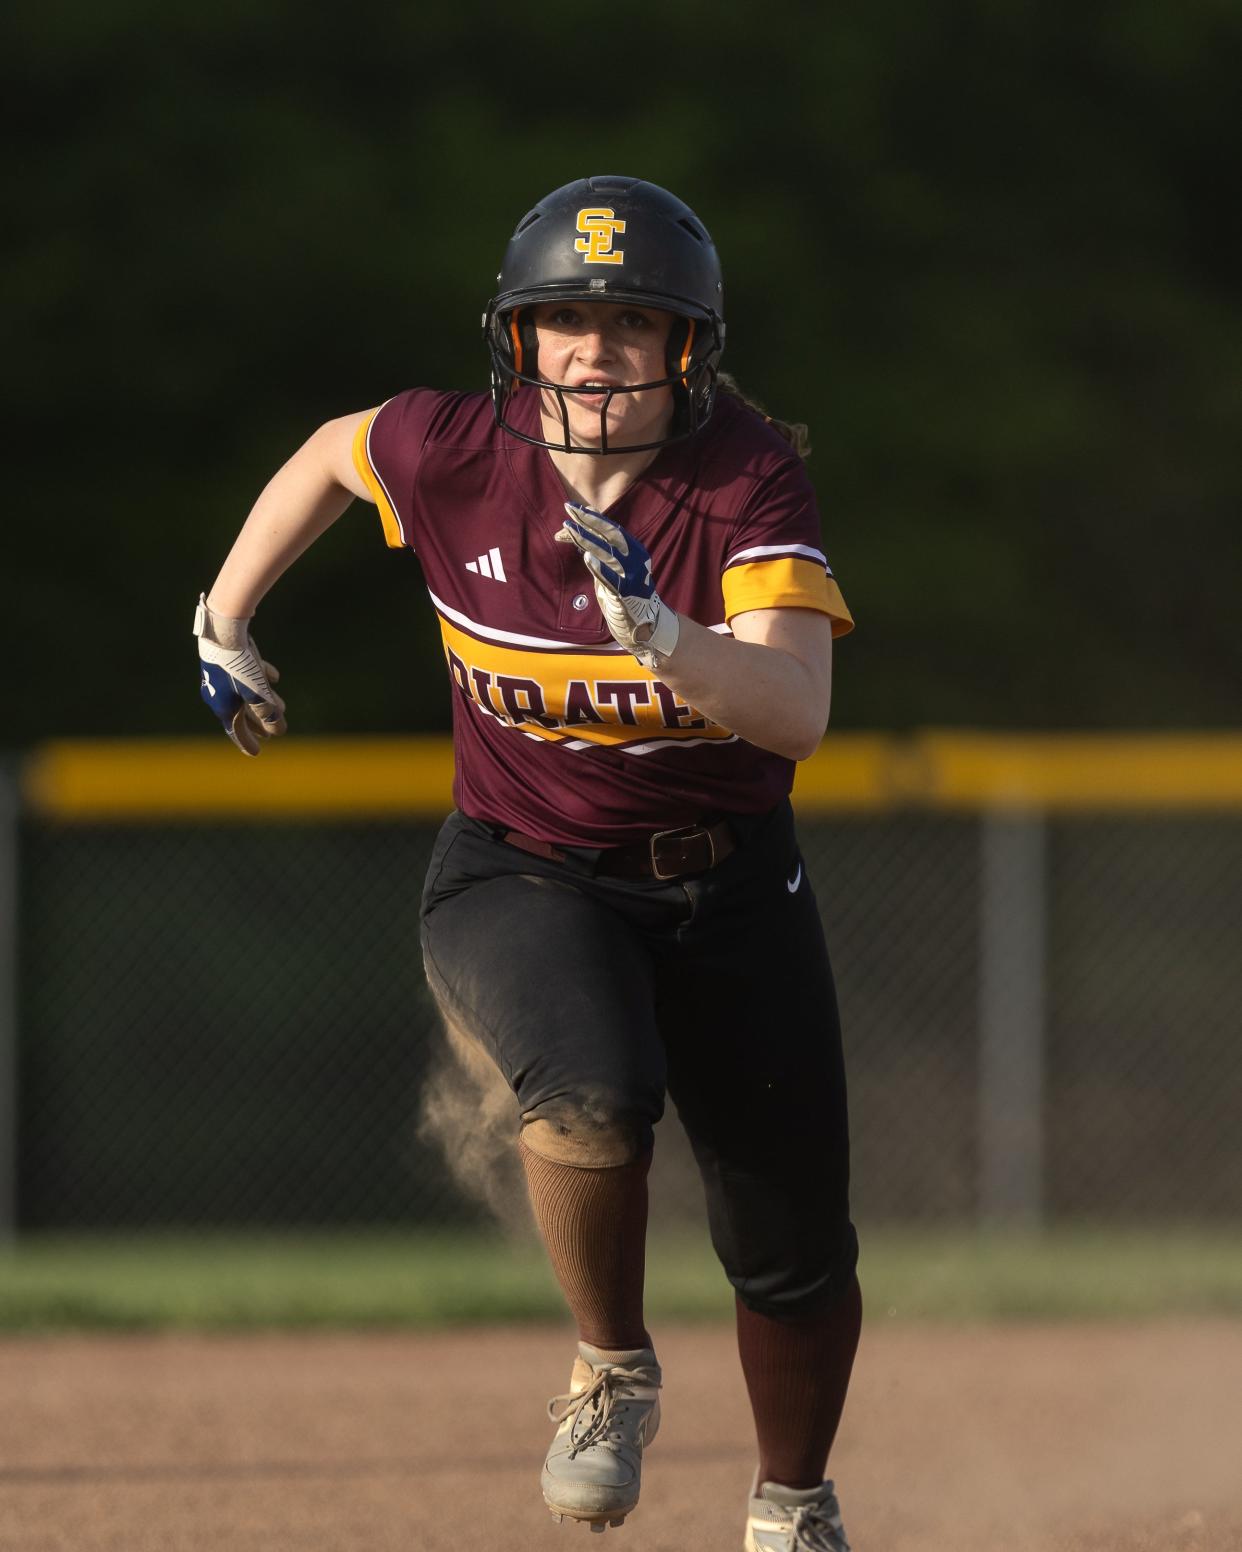 Southeast’s Addie Goldstein charges to steal third base during Wednesday night’s game against the Garfield G-Men in Garrettsville.